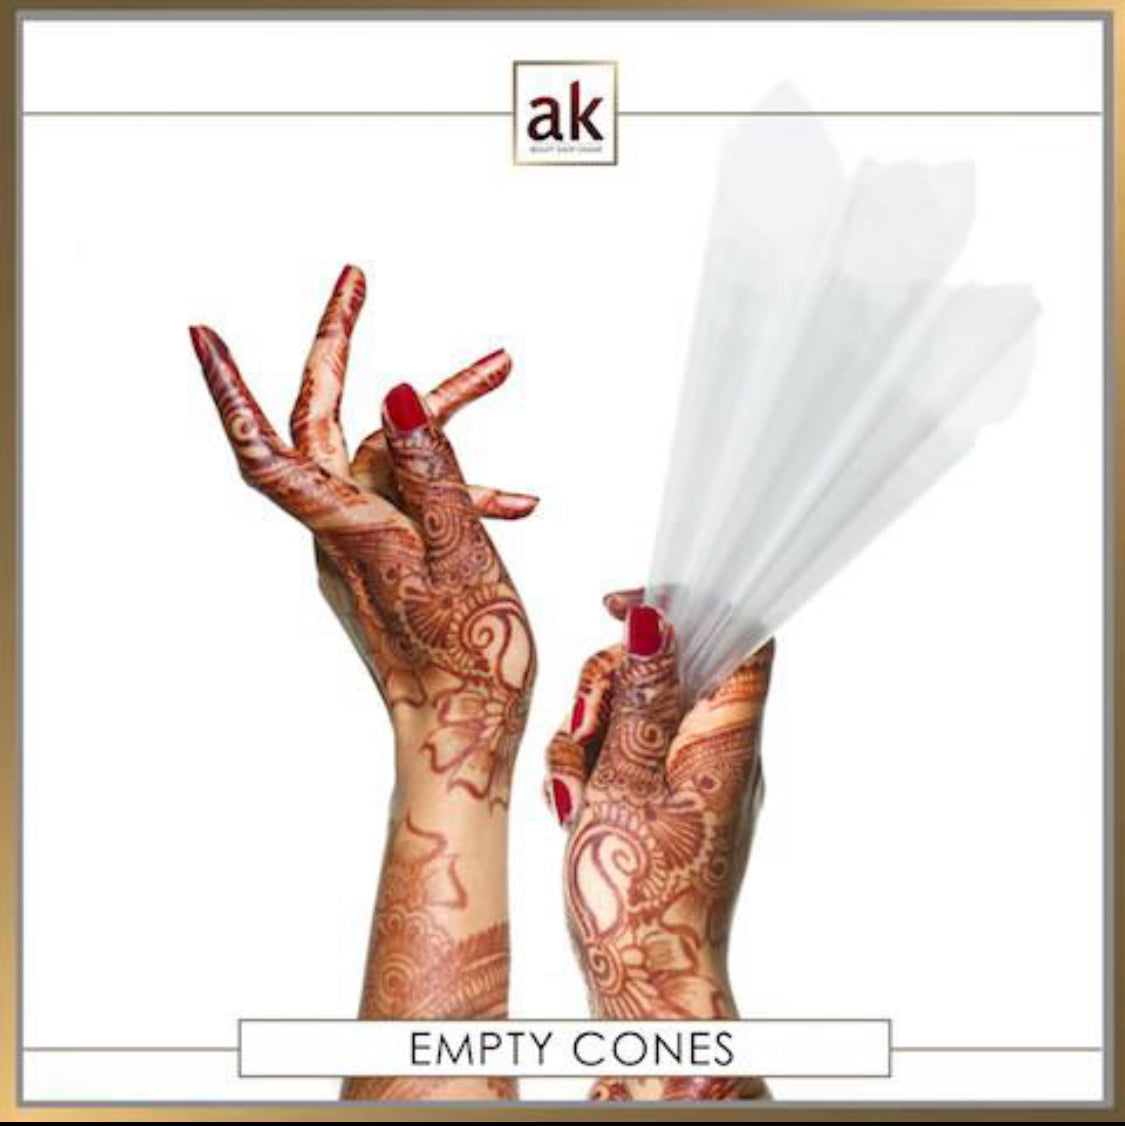 AK STARTER HENNA KIT WITH OIL & 10 EMPTY CONES